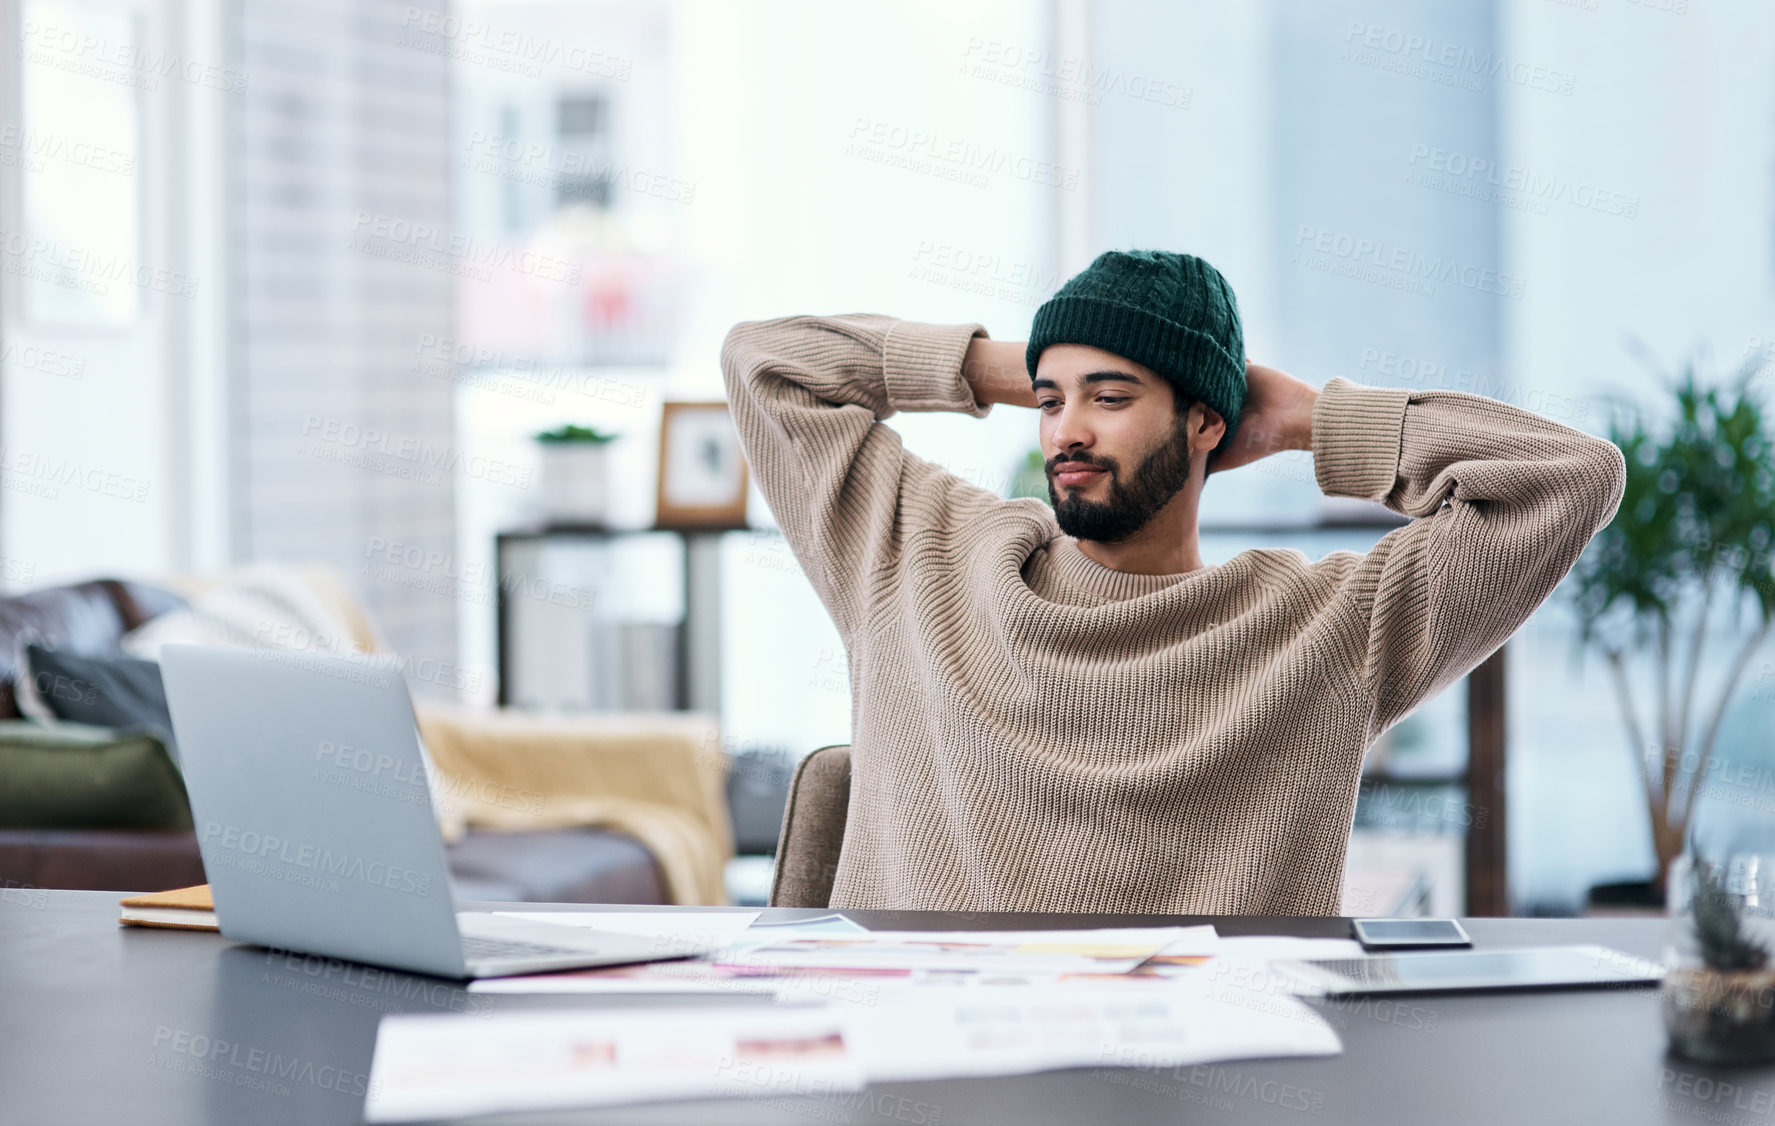 Buy stock photo Shot of a young man taking a break while working from home